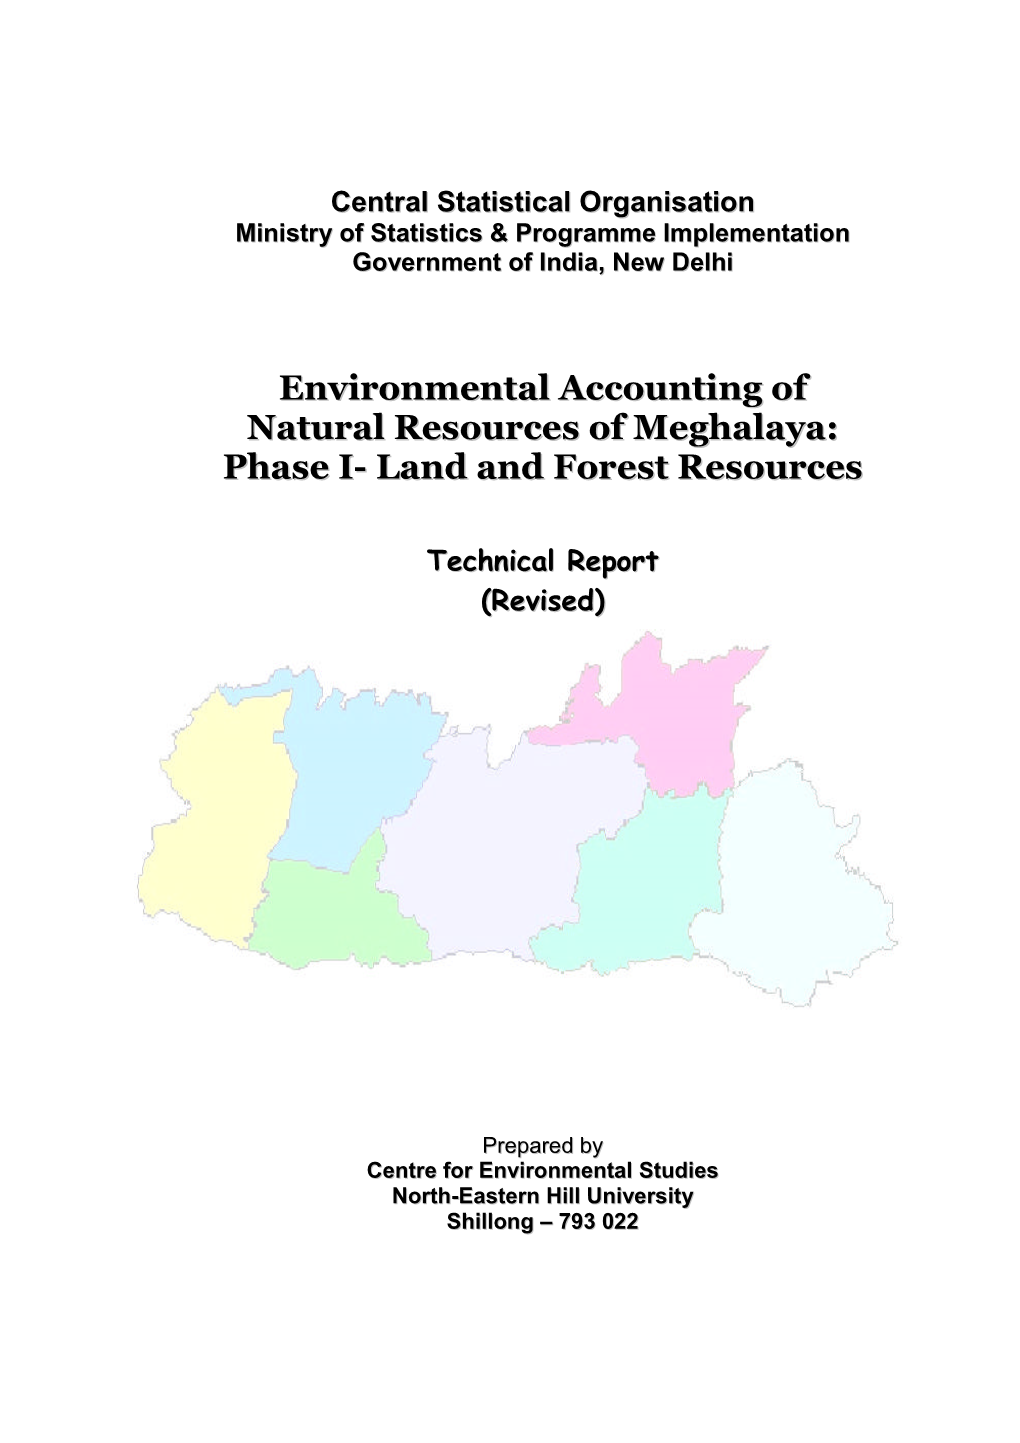 Environmental Accounting of Natural Resources of Meghalaya: Phase I- Land and Forest Resources